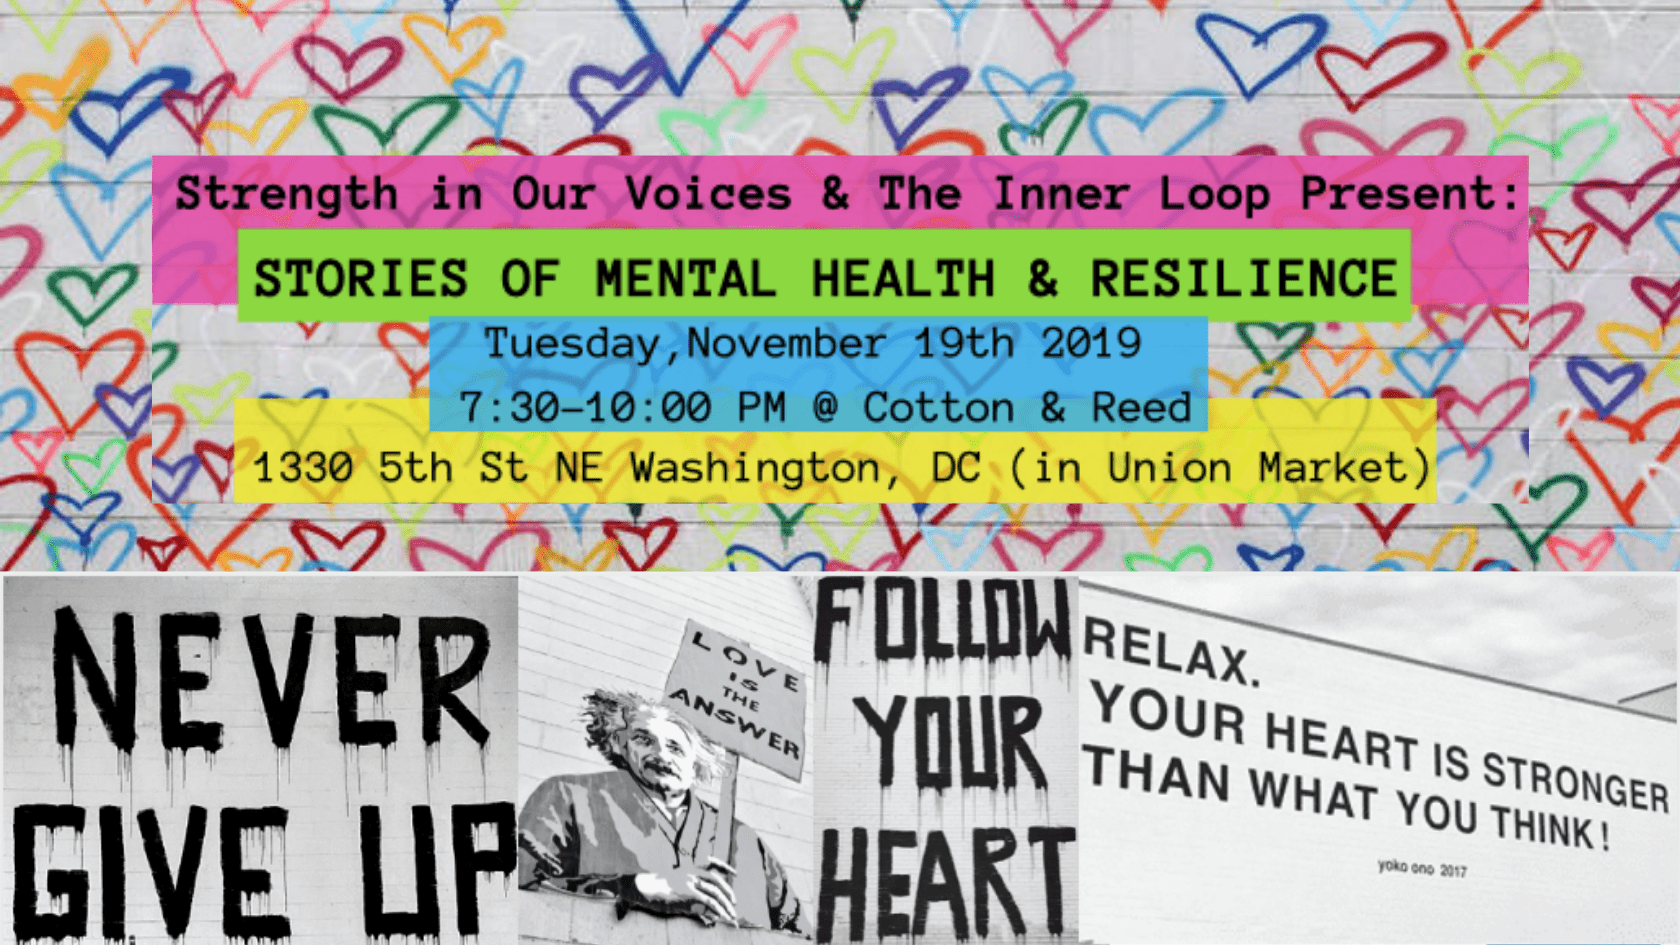 Event poster for SIOV community wellness event: STORIES OF MENTAL HEALTH & RESILIENCE